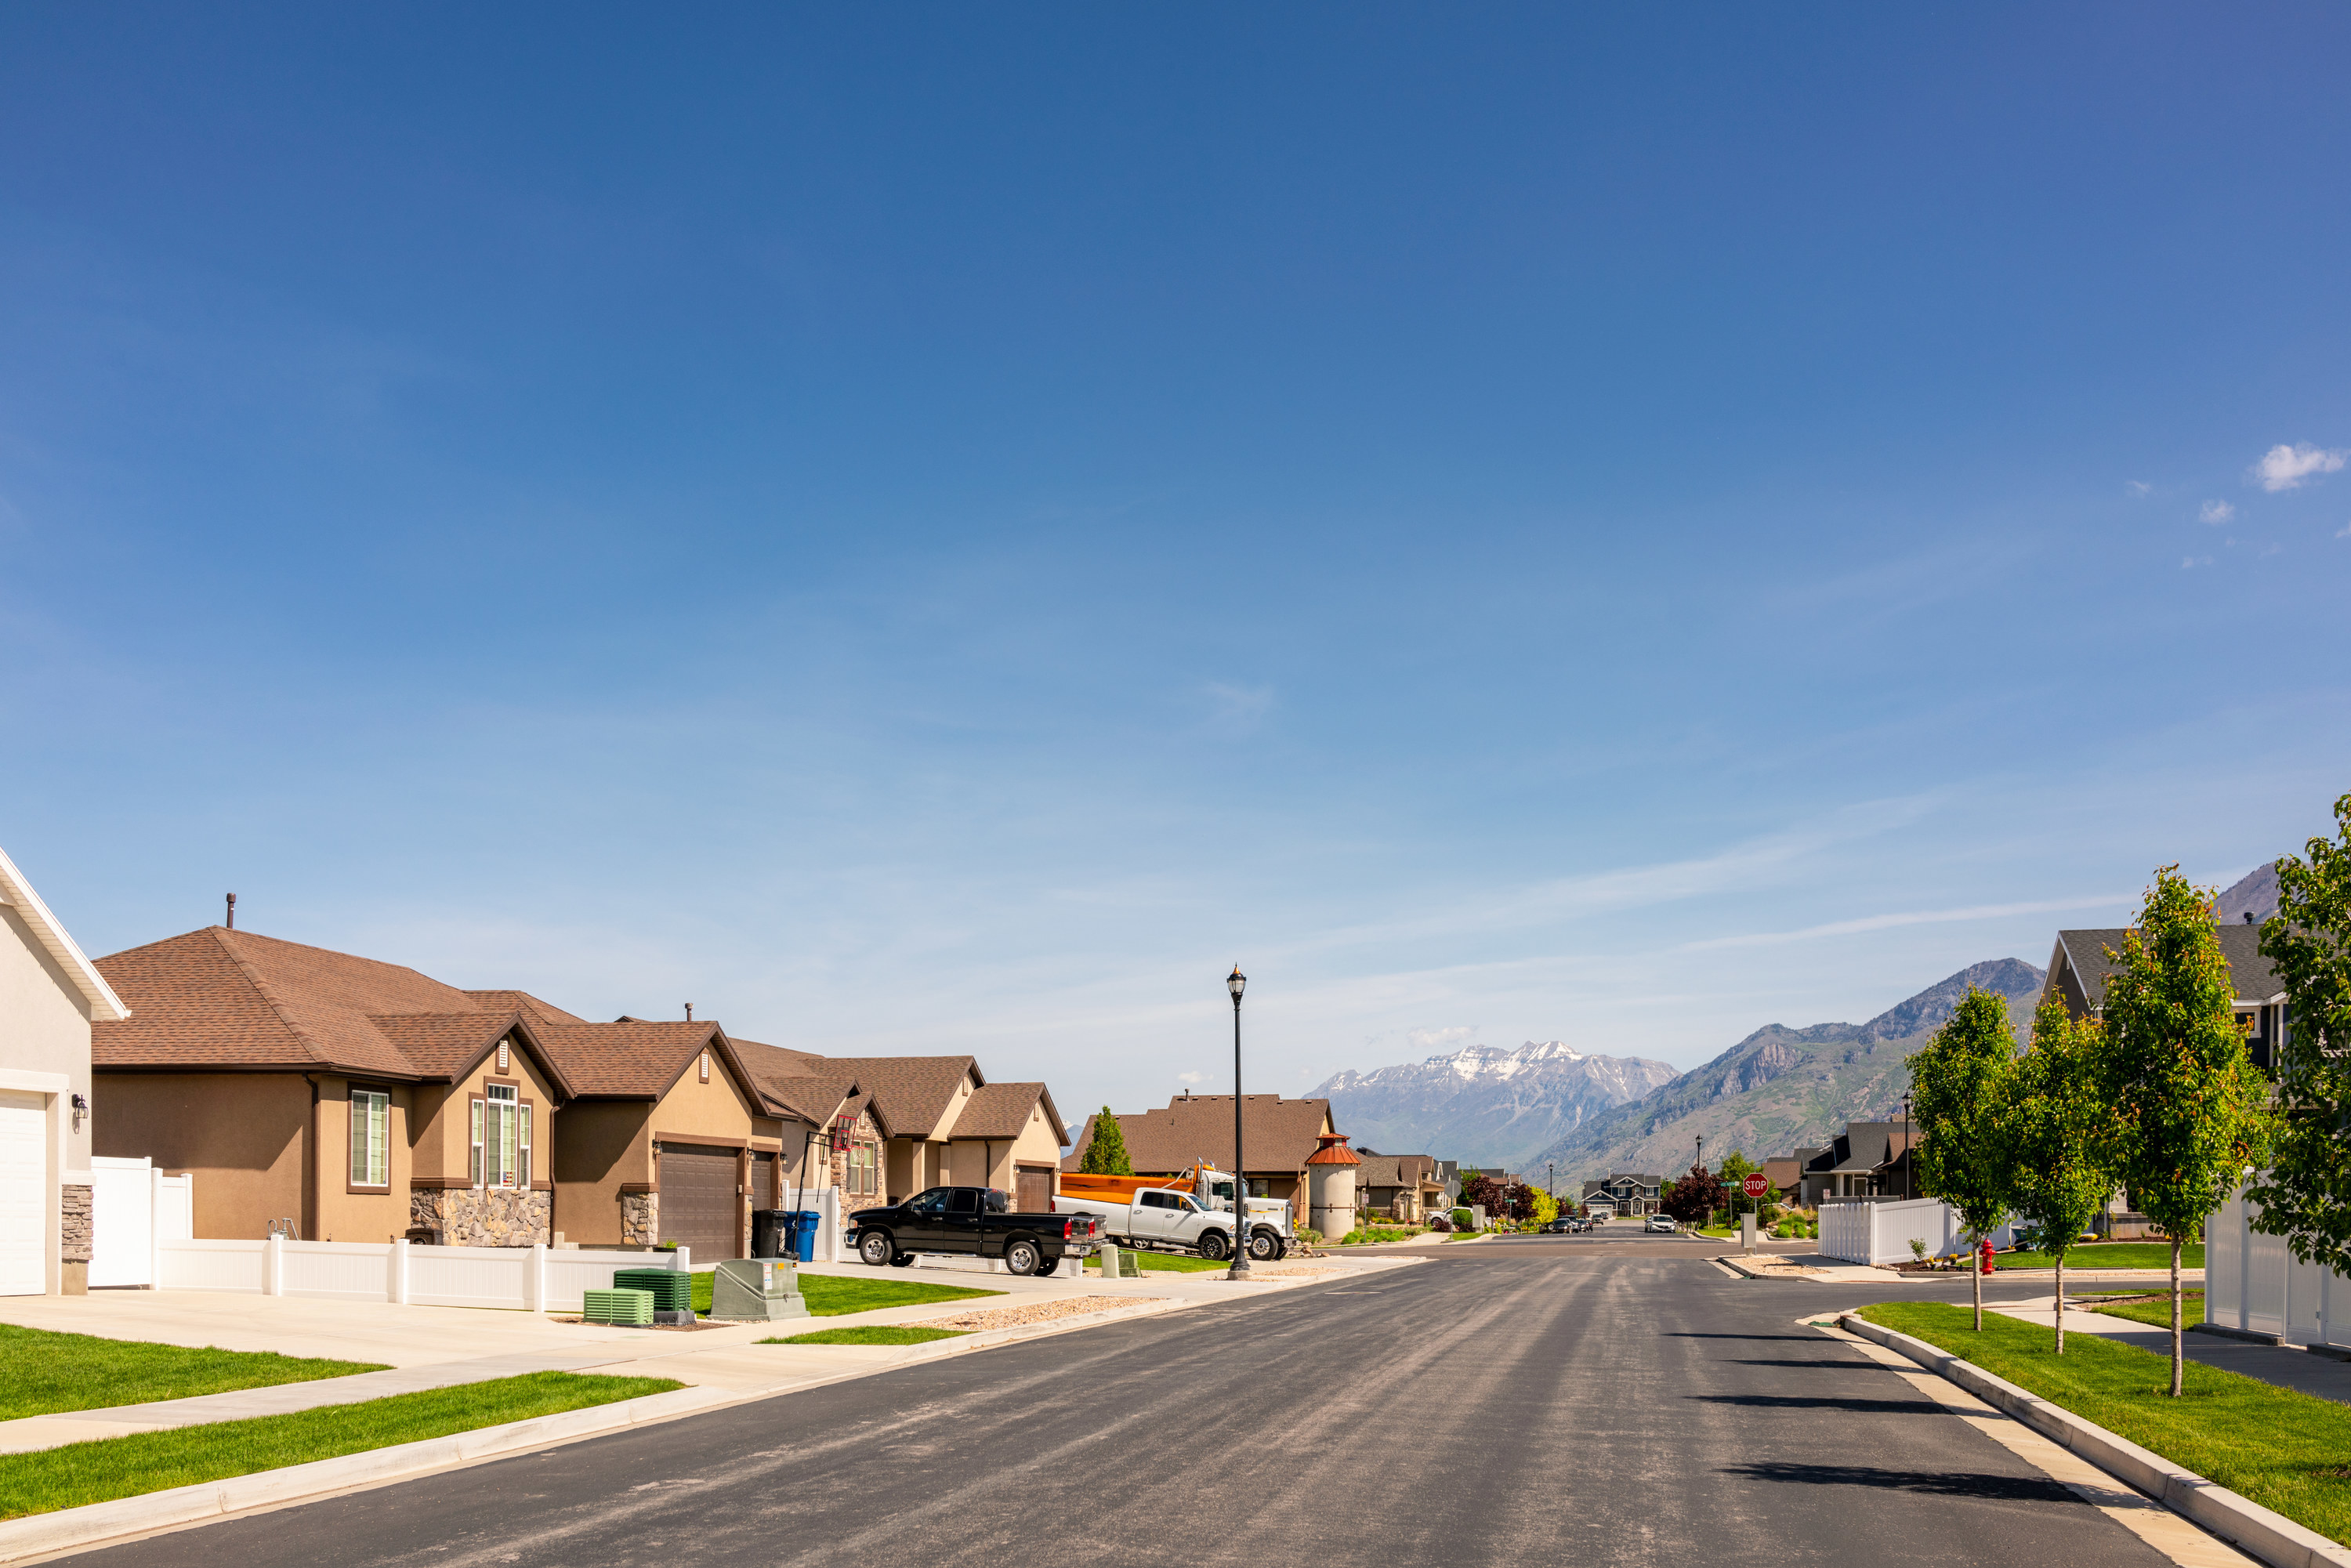 A view down the street of a modern suburban housing development to the south of Salt Lake City in Utah, USA